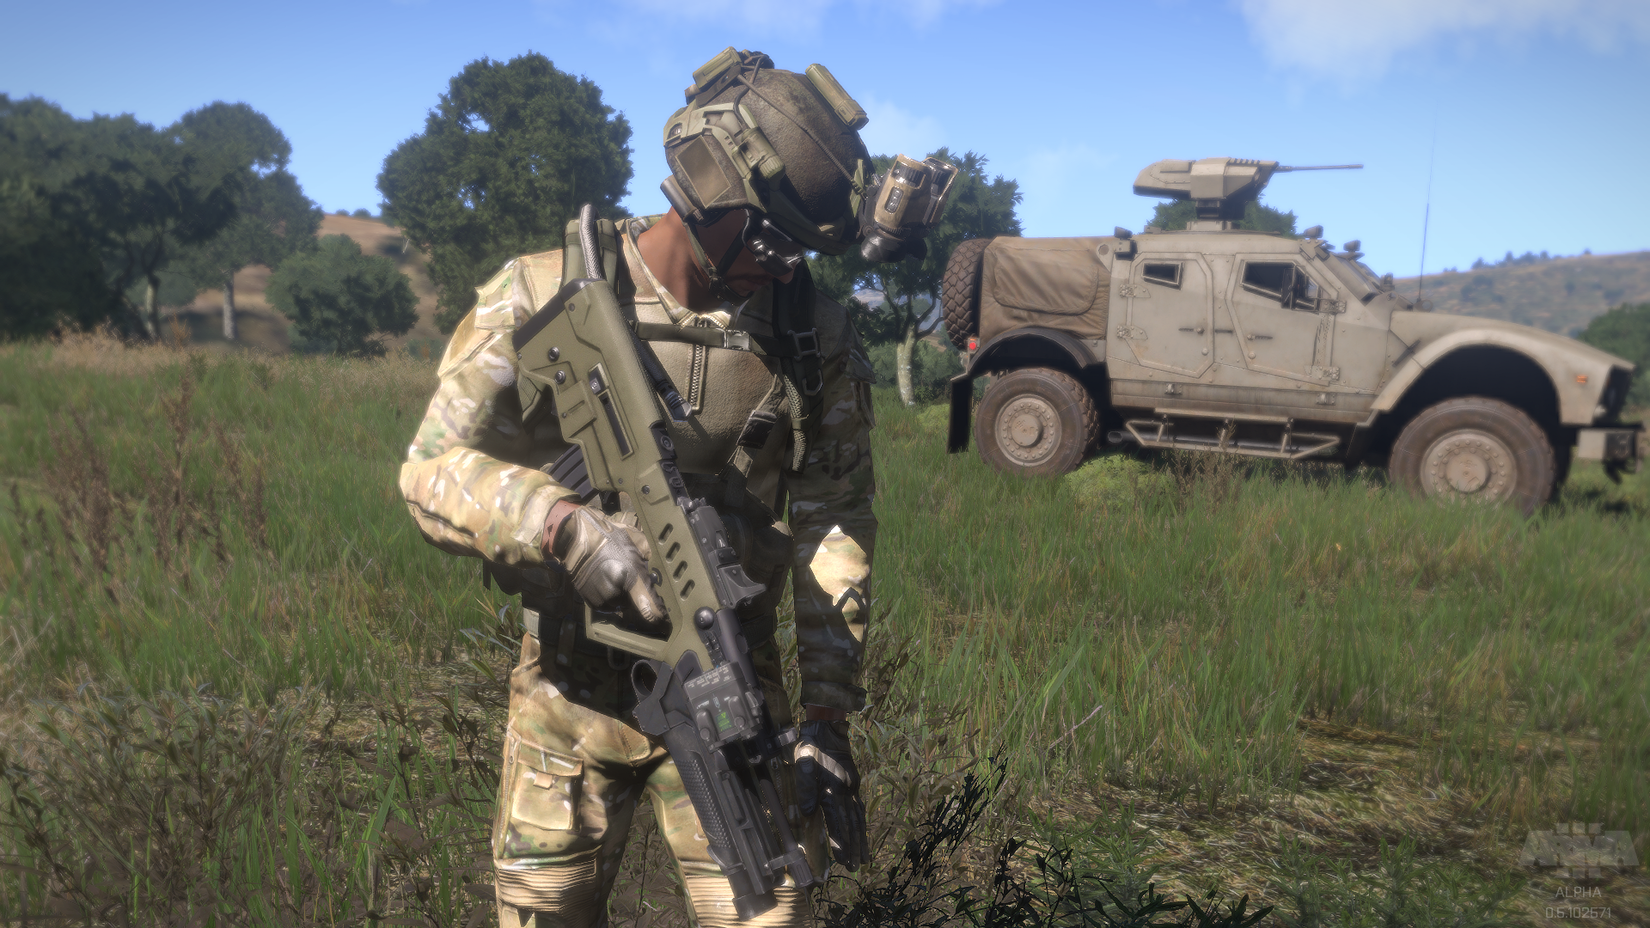 Play Arma 3 for Free This Weekend - GameSpot